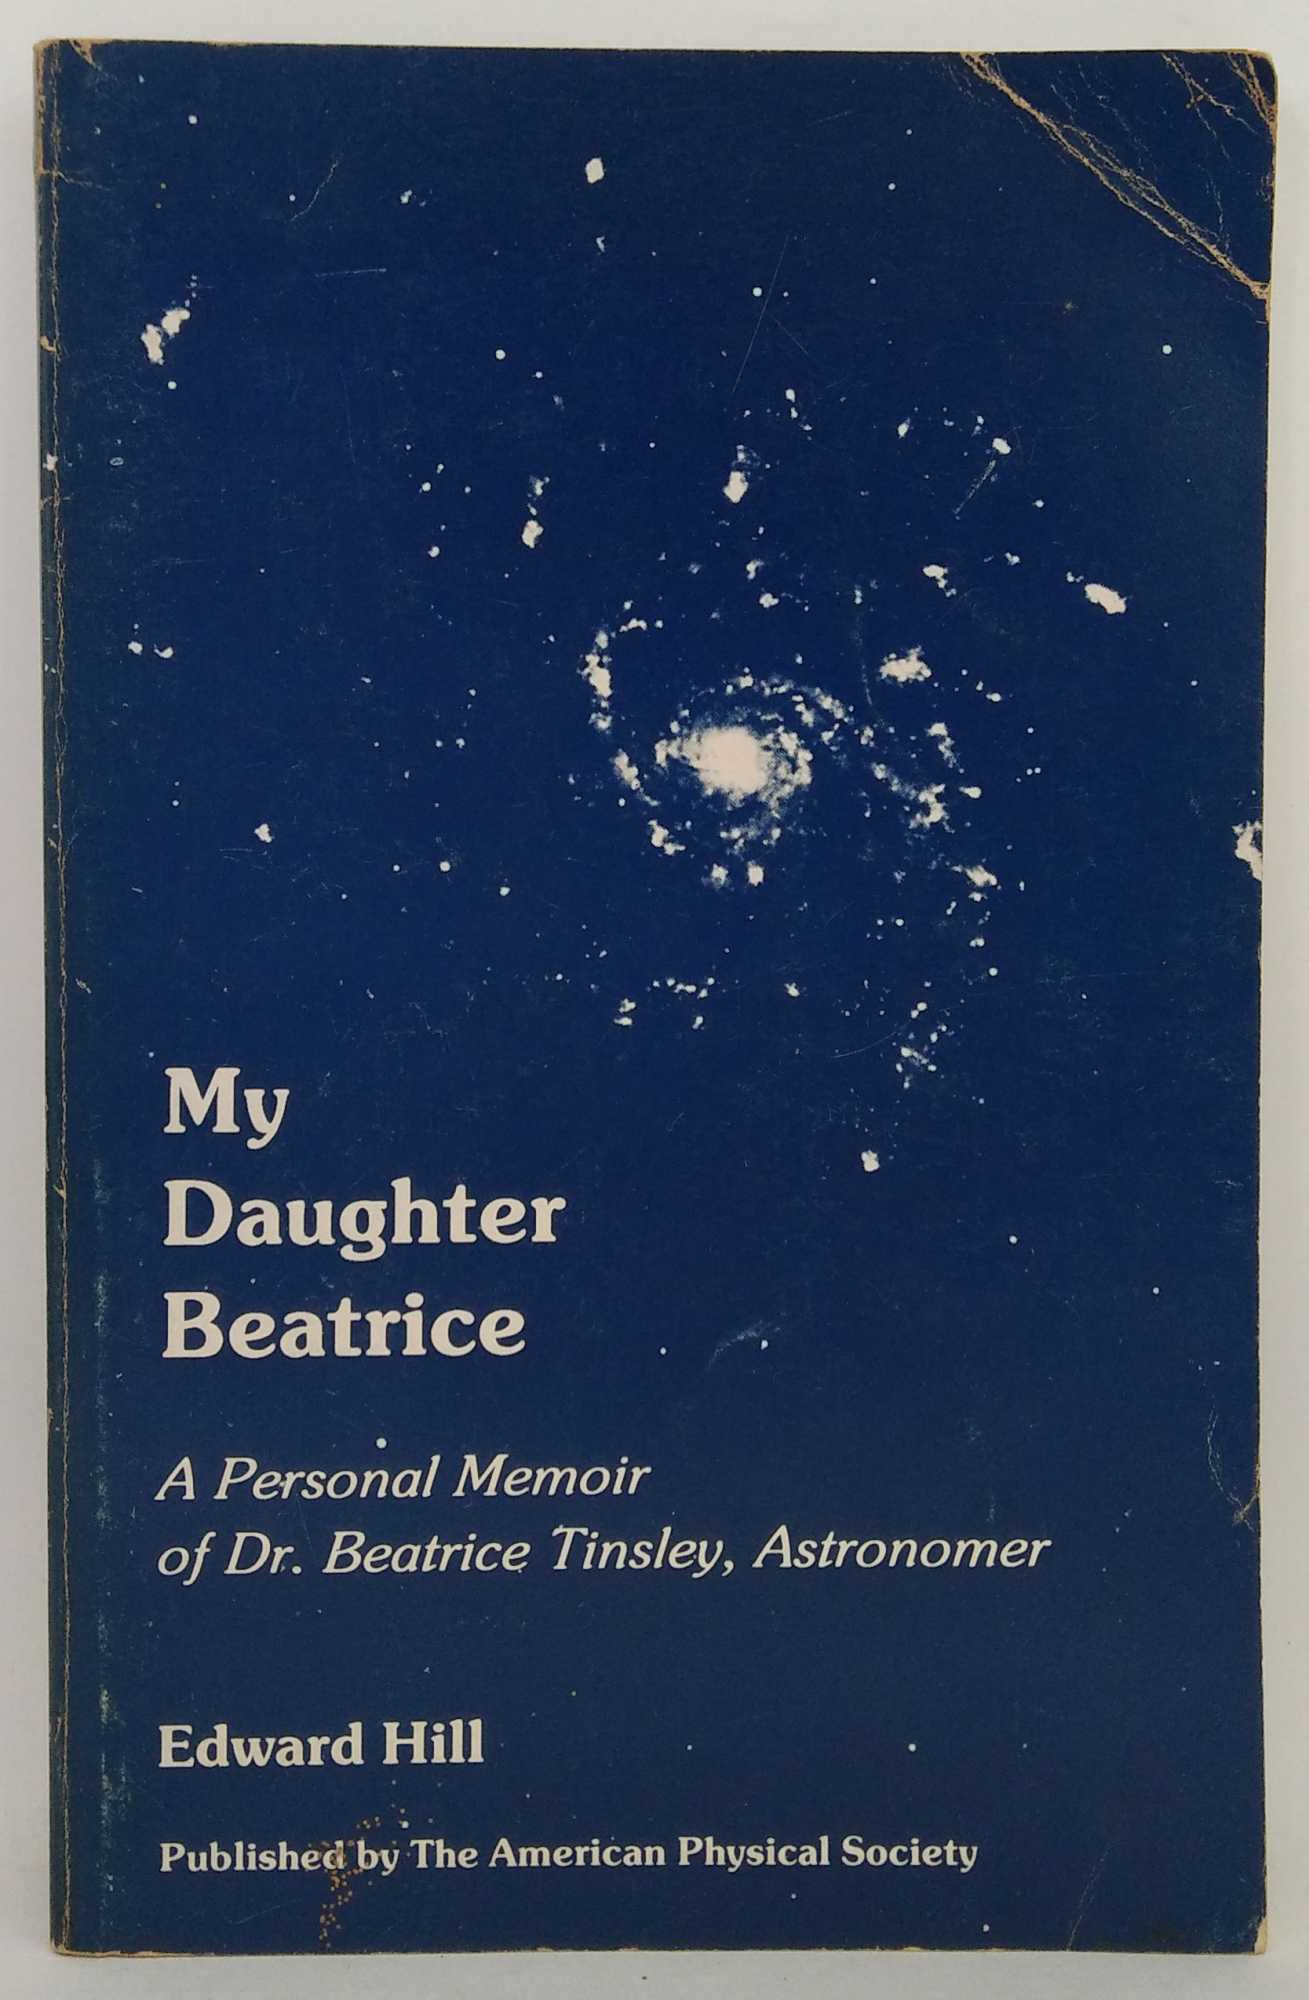 Edward Hill - My Daughter Beatrice: A Personal Memoir of Dr. Beatrice Tinsley, Astronomer